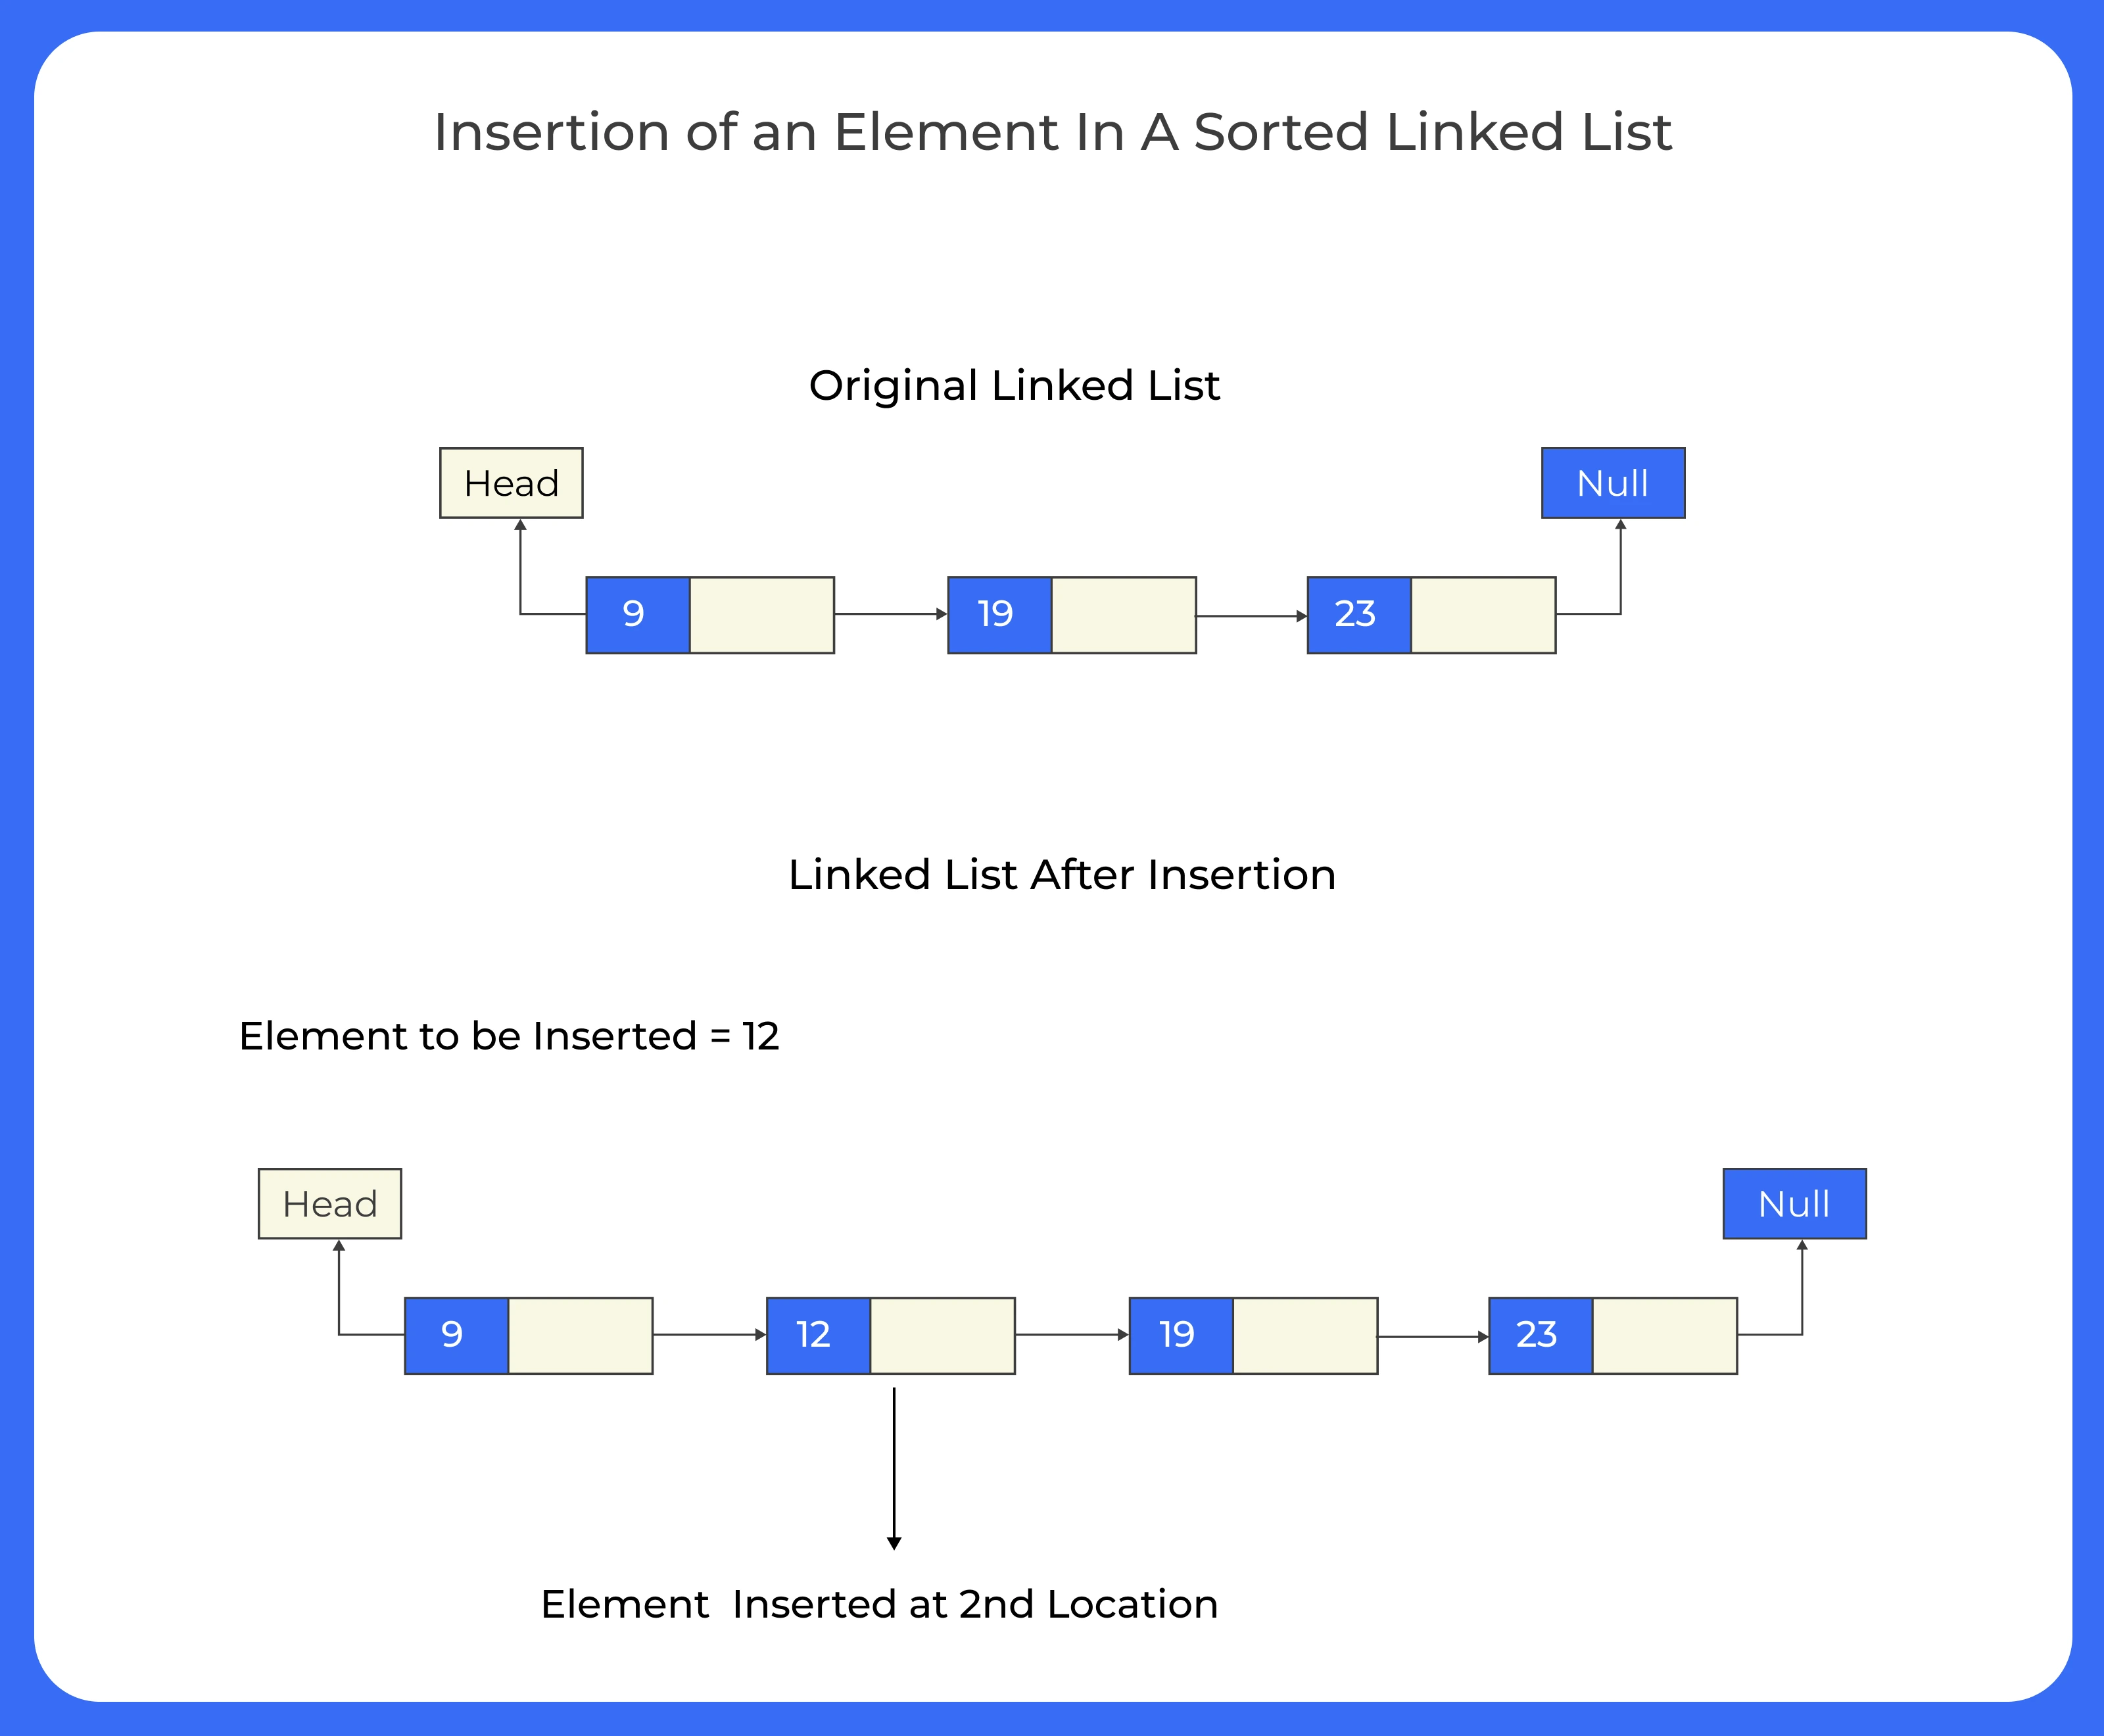 C++ program for insertion in a sorted linked list